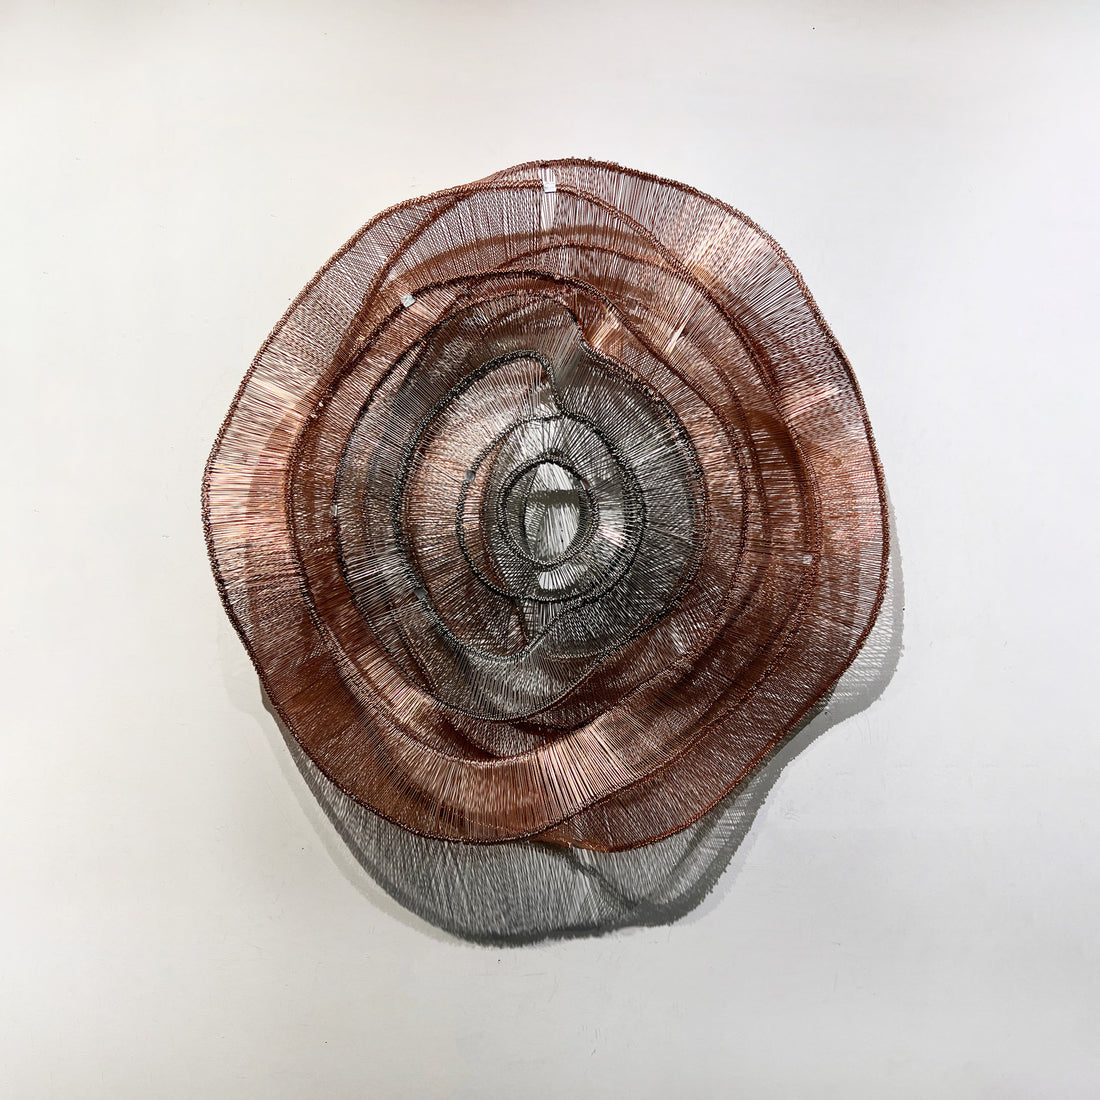 Emergence Series Copper and Steel